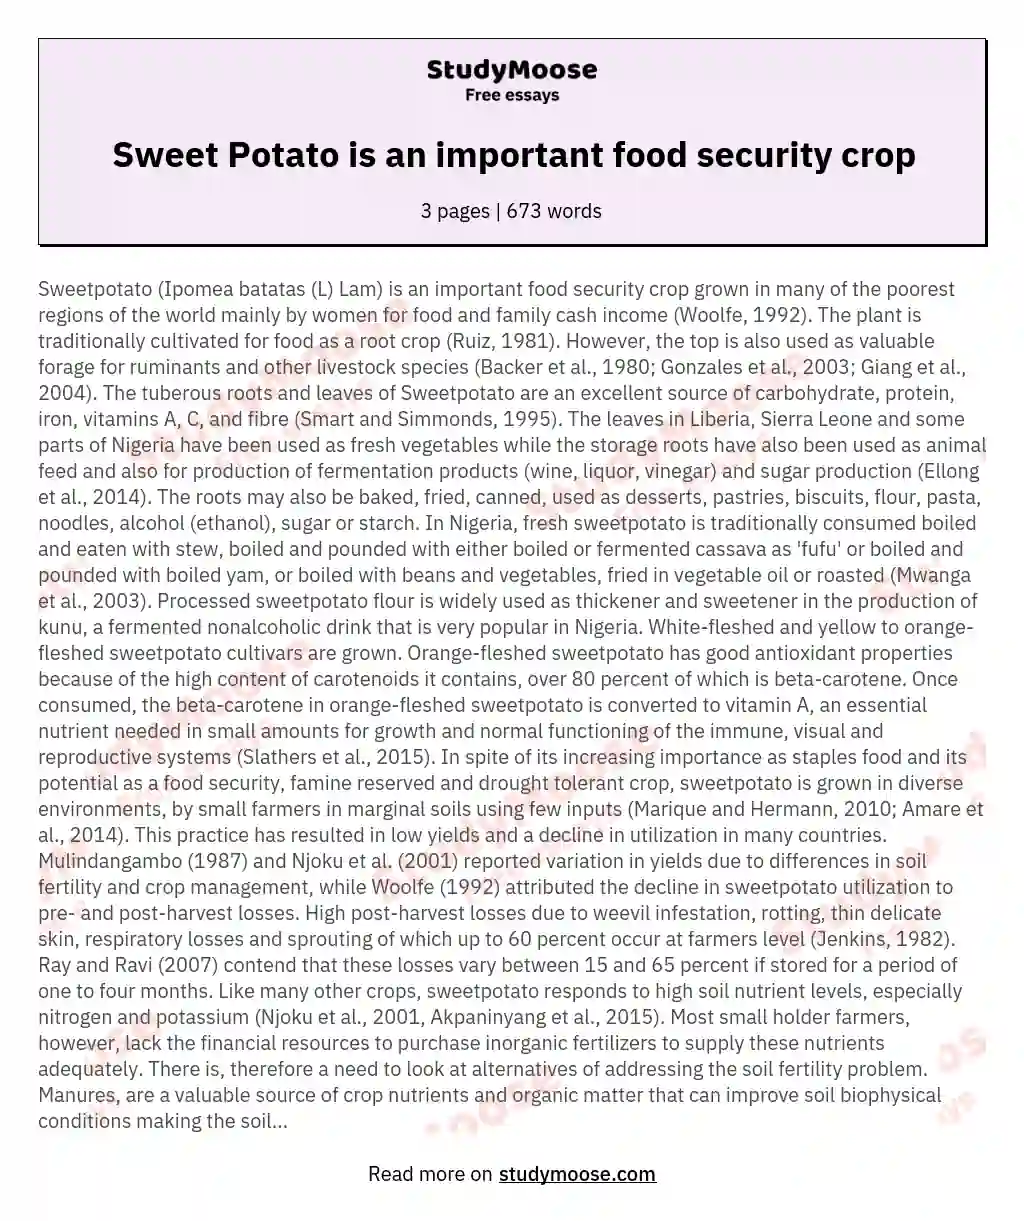 Sweet Potato is an important food security crop essay